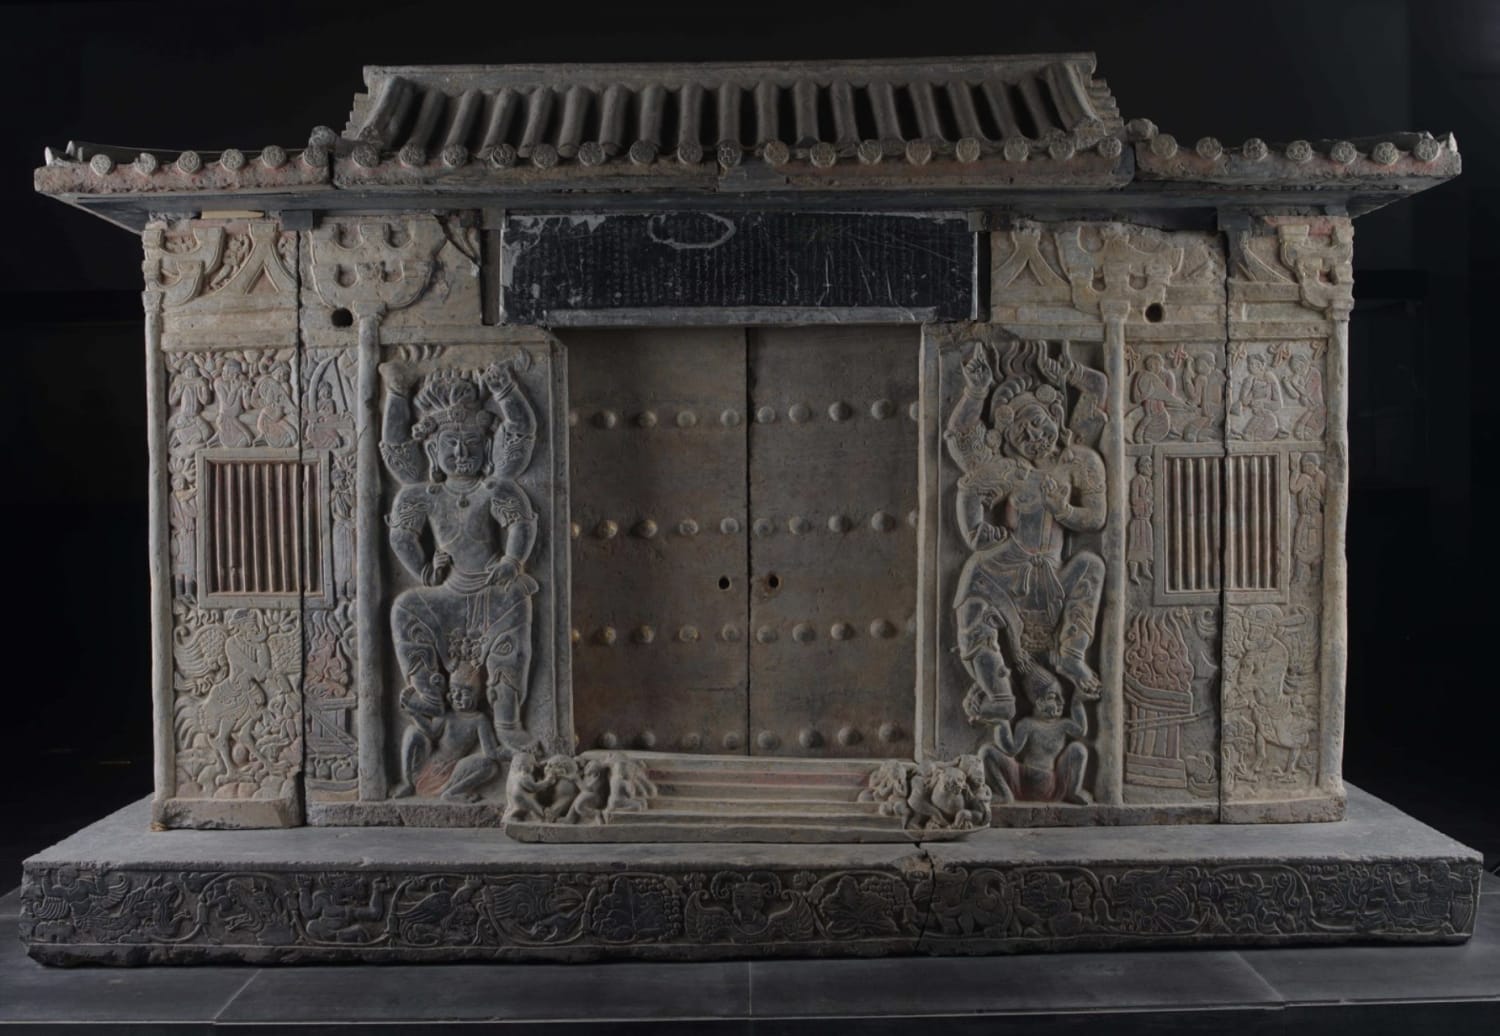 The sarcophagus of Wirkak, an 86-year-old Sogdian caravan leader, 580 CE. This Iranian culture was among the most important merchant societies on the Silk Road. The tomb imitates Chinese domestic architecture and the epitaph is bilingual. Studded doors are flanked by four-armed guards. Xi'an, China.